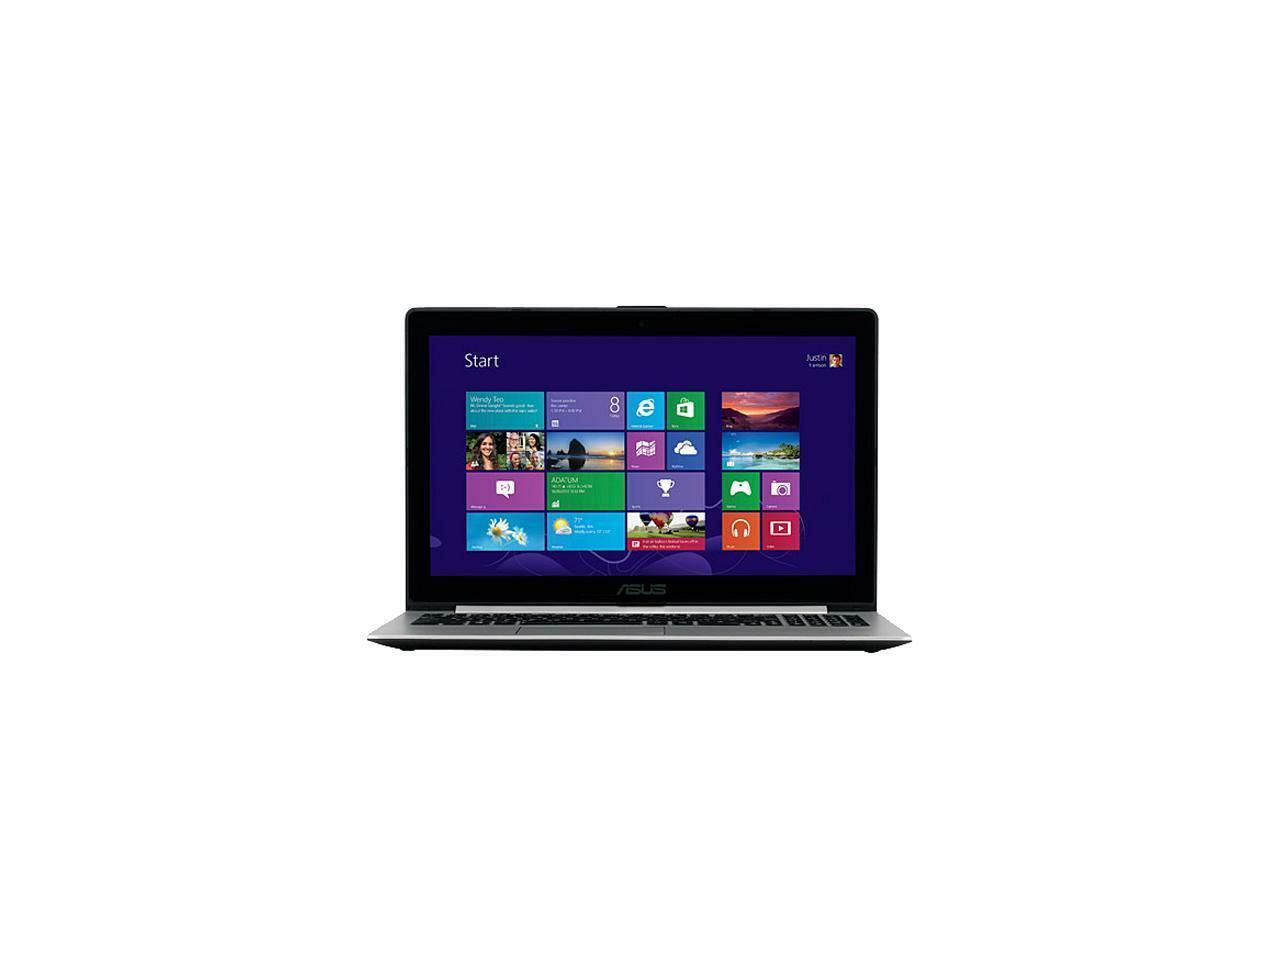 New Asus S500C Ultrabook 15.6 i7 upto 3GHz 4GB 500GB HHD+ 24GB Win8 touch screen